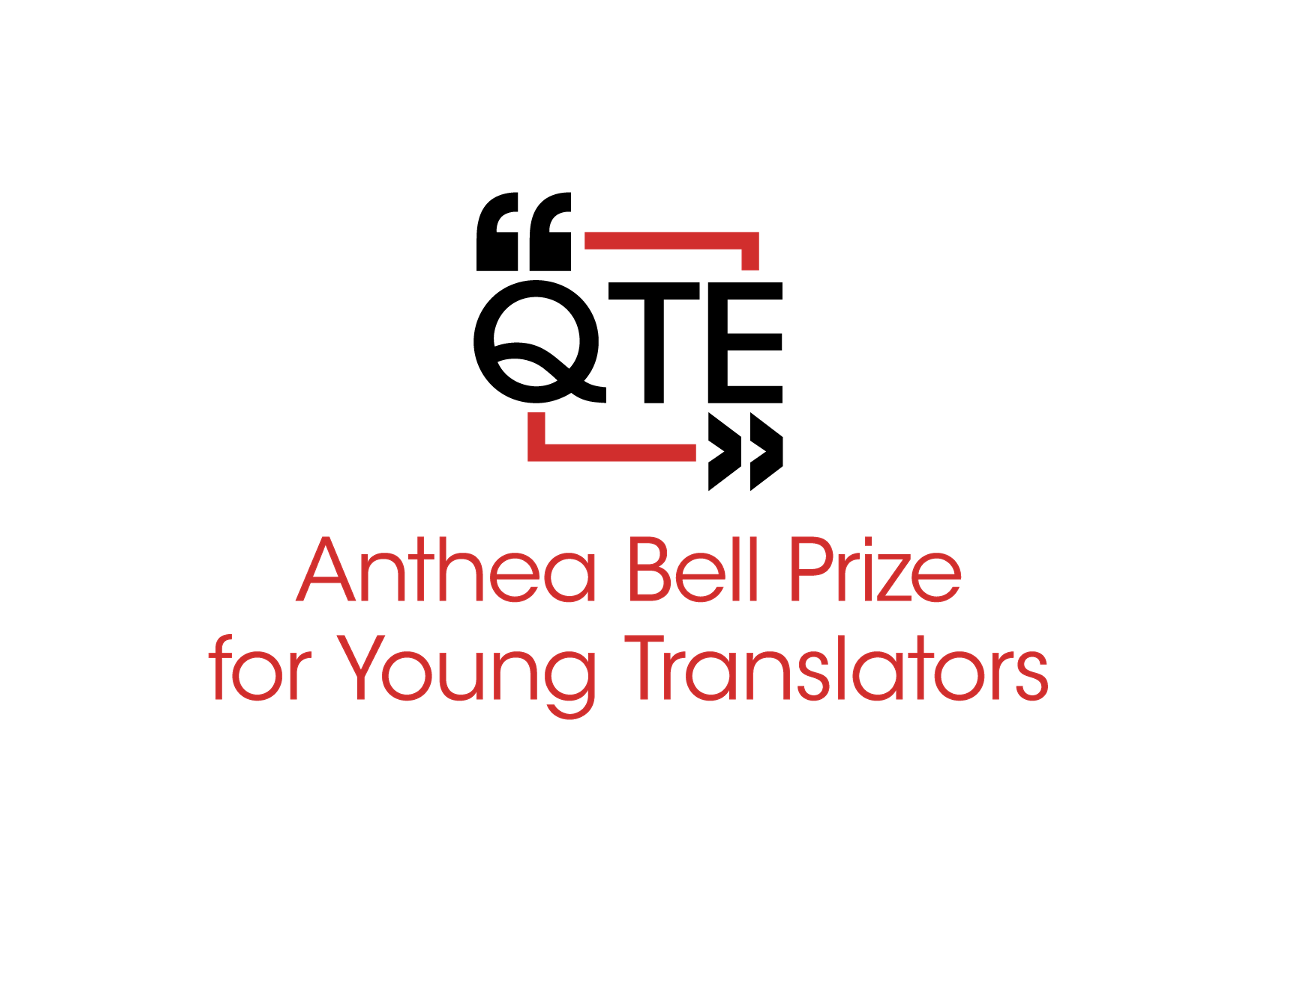 logo for Anthea Bell Prize with QTE in a red square with two kinds of quotation marks and the text 'Anthea Bell Prize for Young Translators' in red underneath